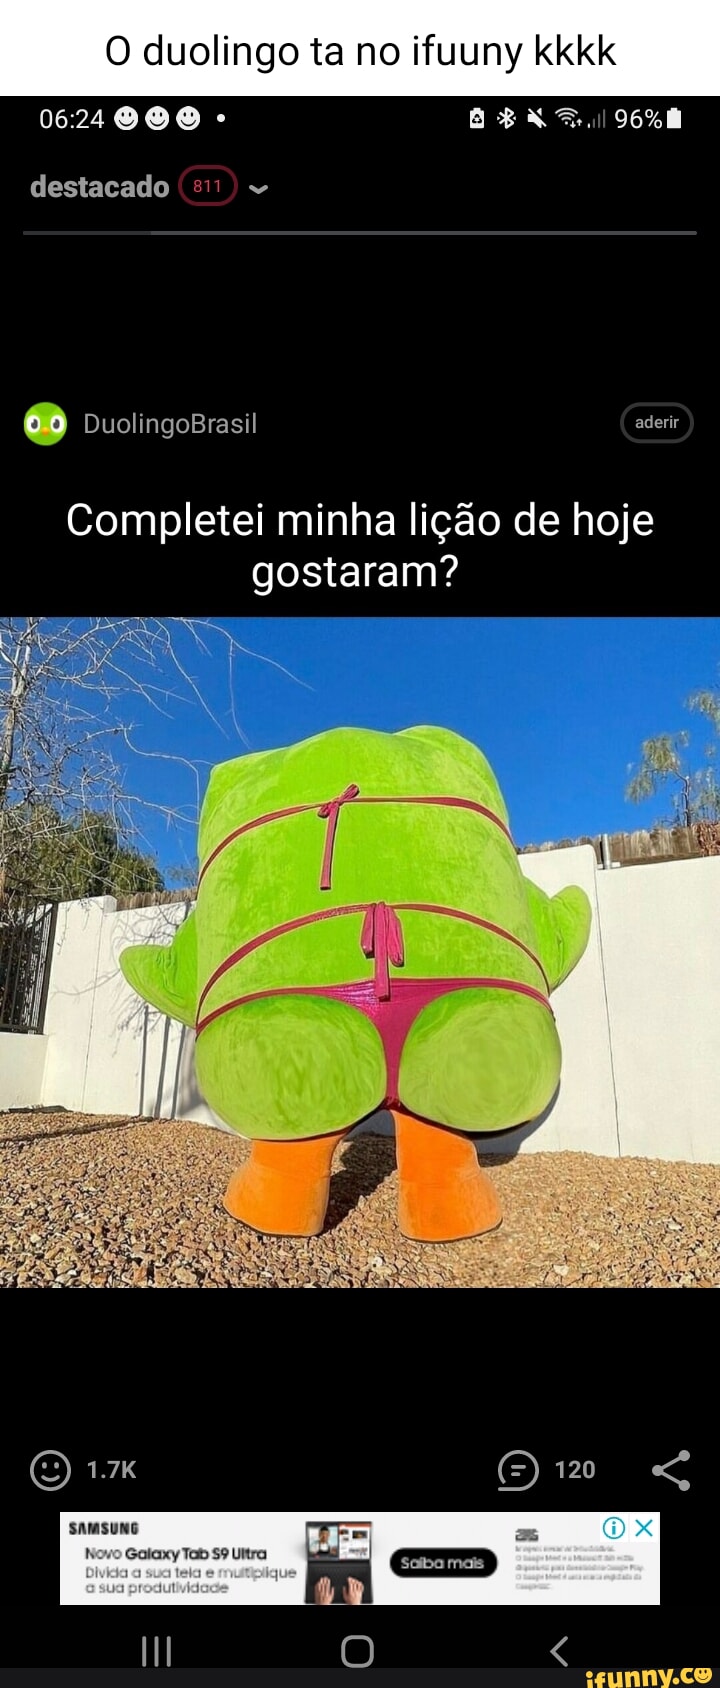 Gdoarda memes. Best Collection of funny Gdoarda pictures on iFunny Brazil